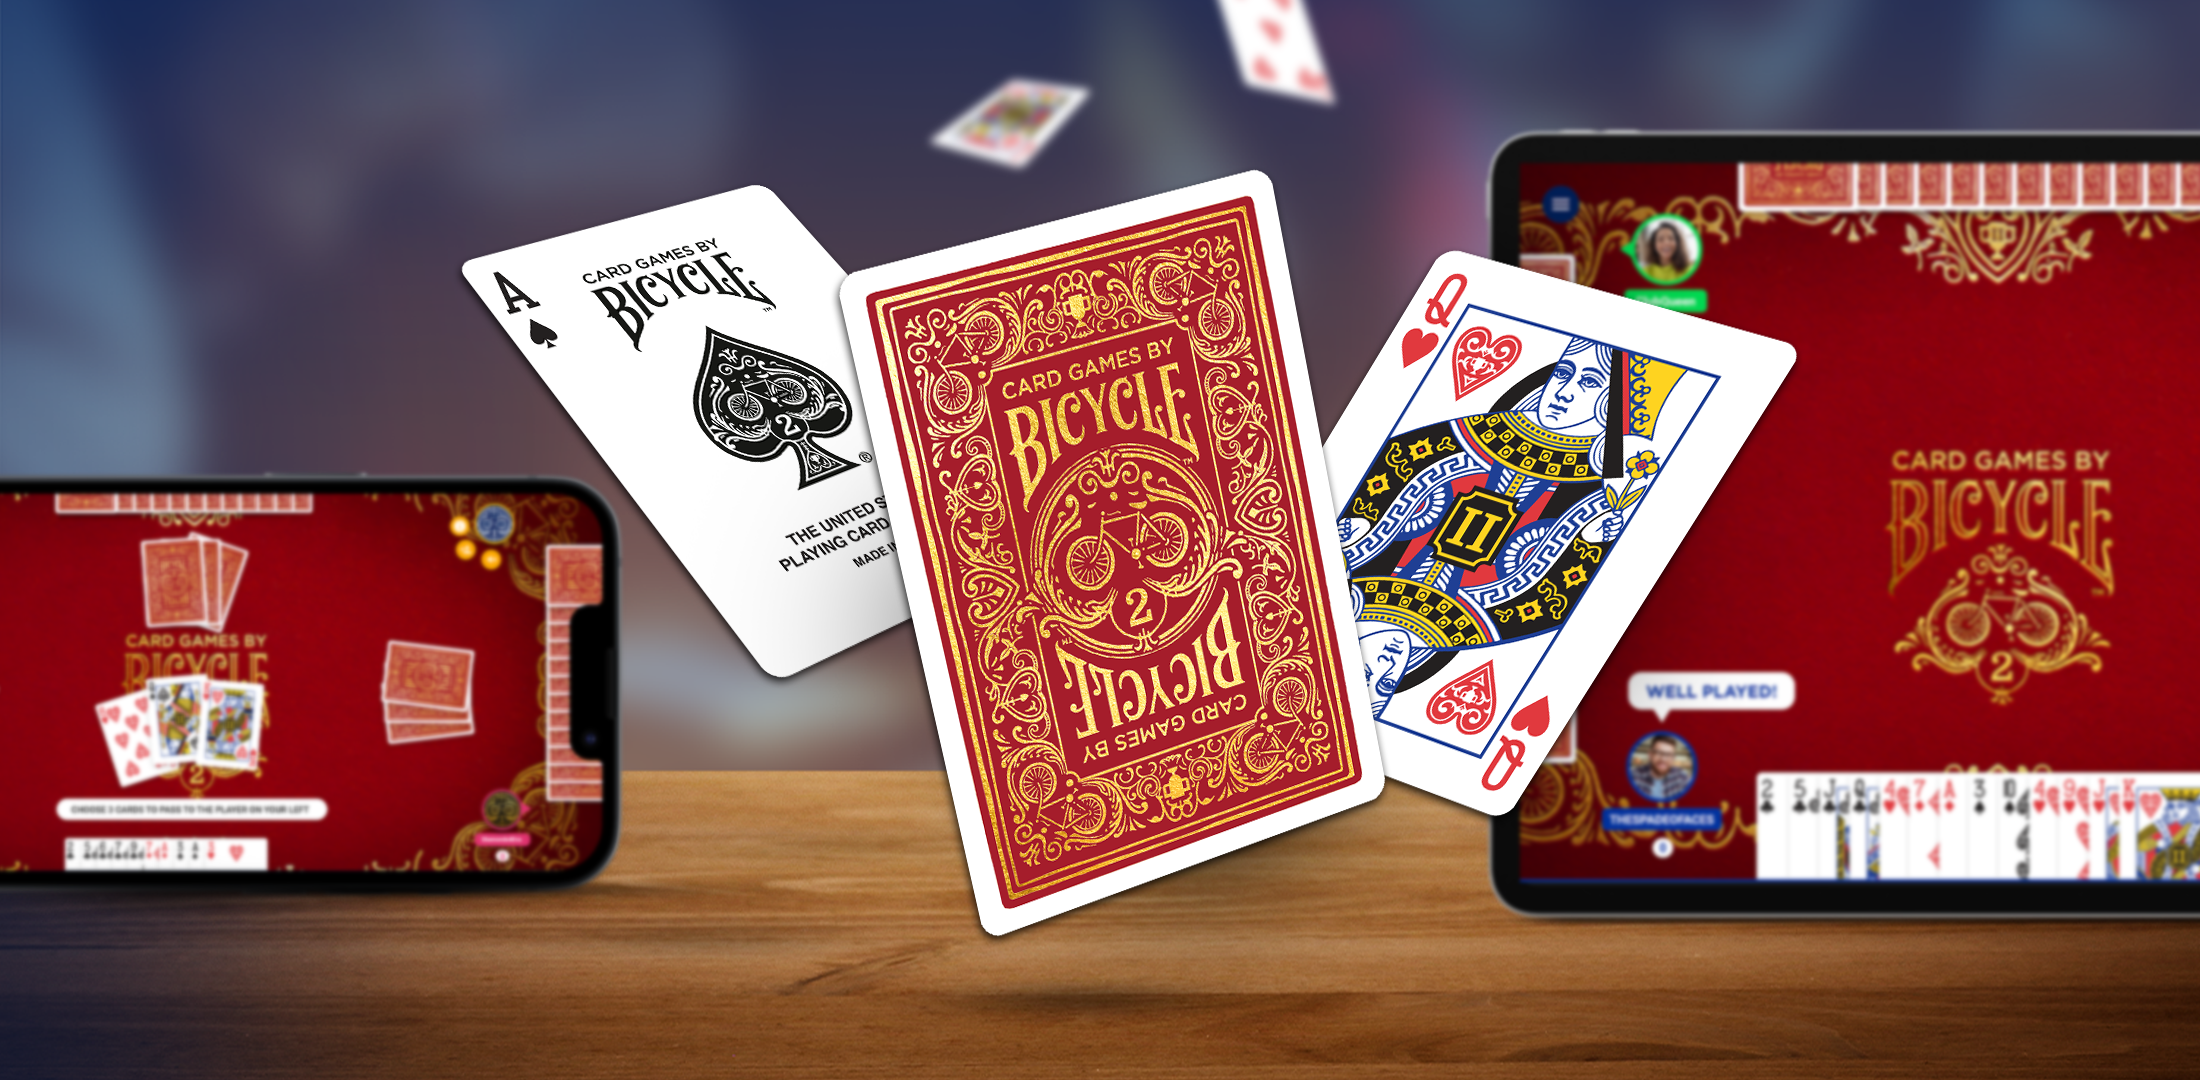 The Card Games by Bicycle app rewards all top players on the leaderboard with a unique digital cards, avatars and a table to be used in the app.